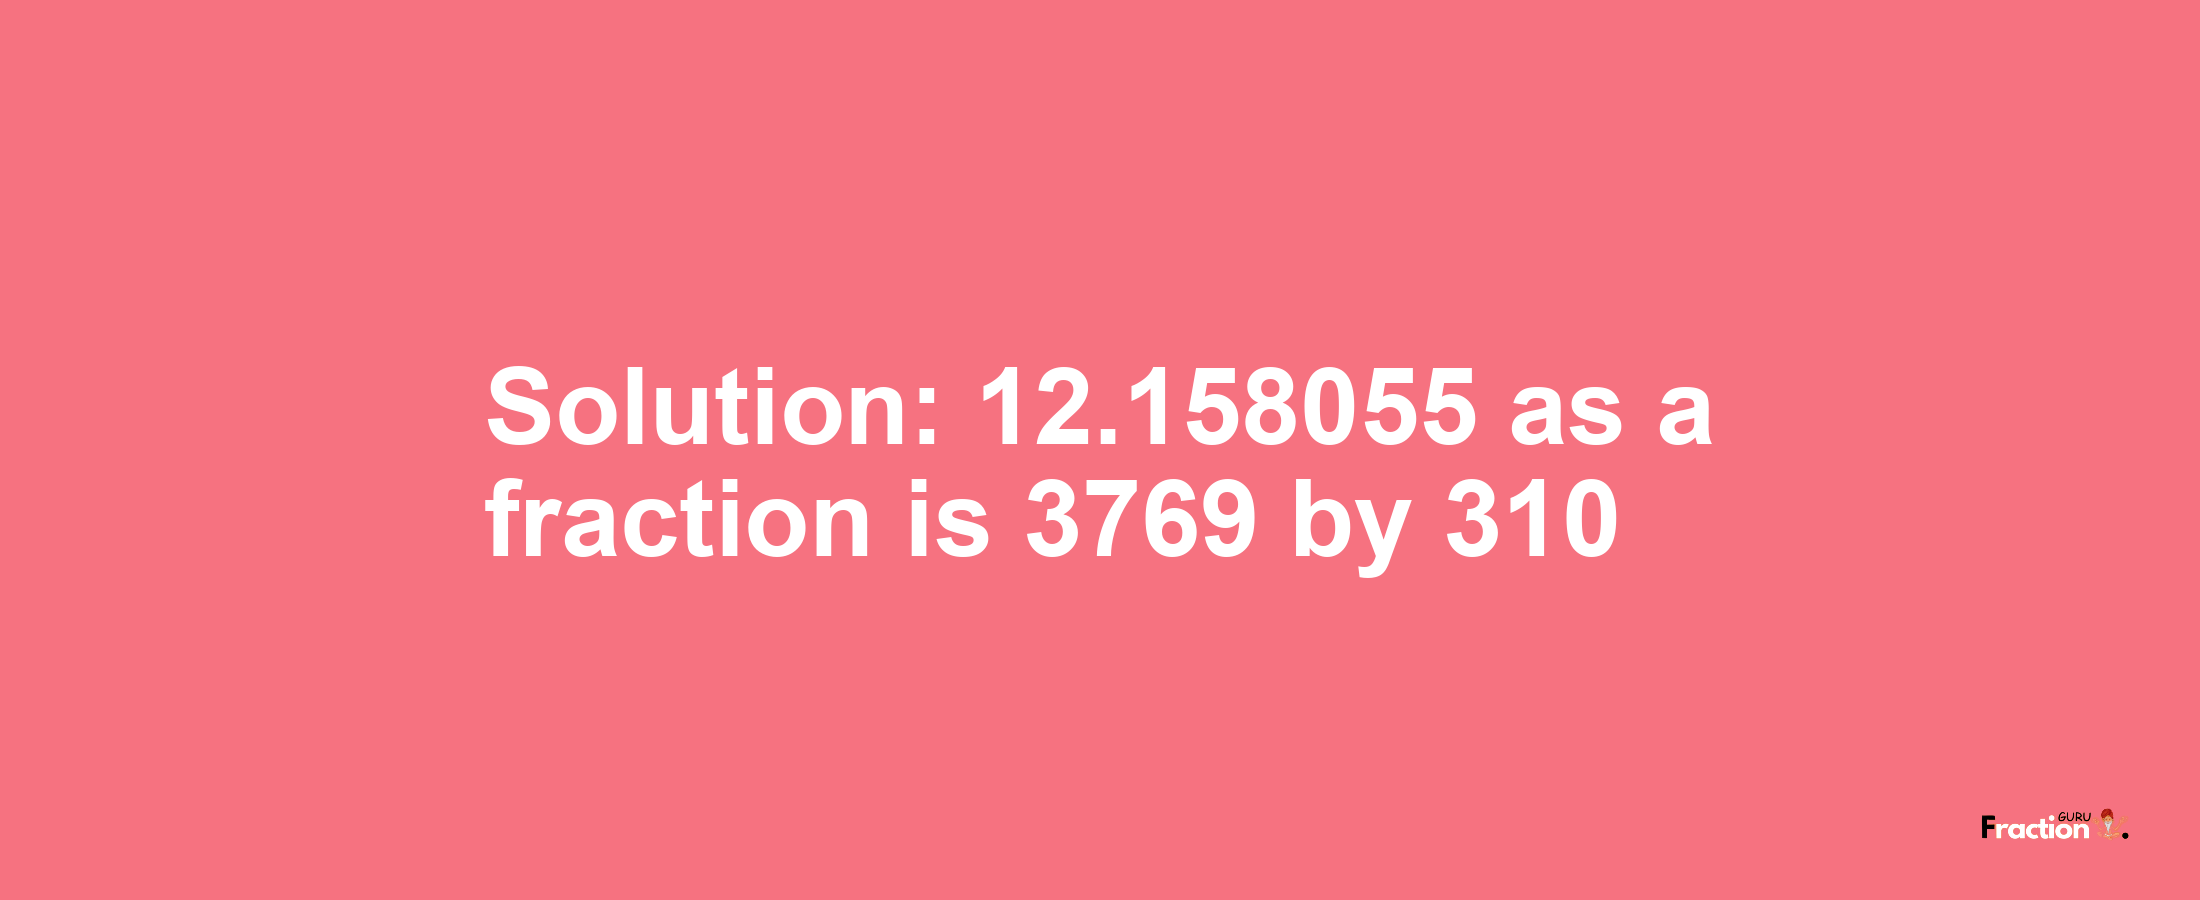 Solution:12.158055 as a fraction is 3769/310